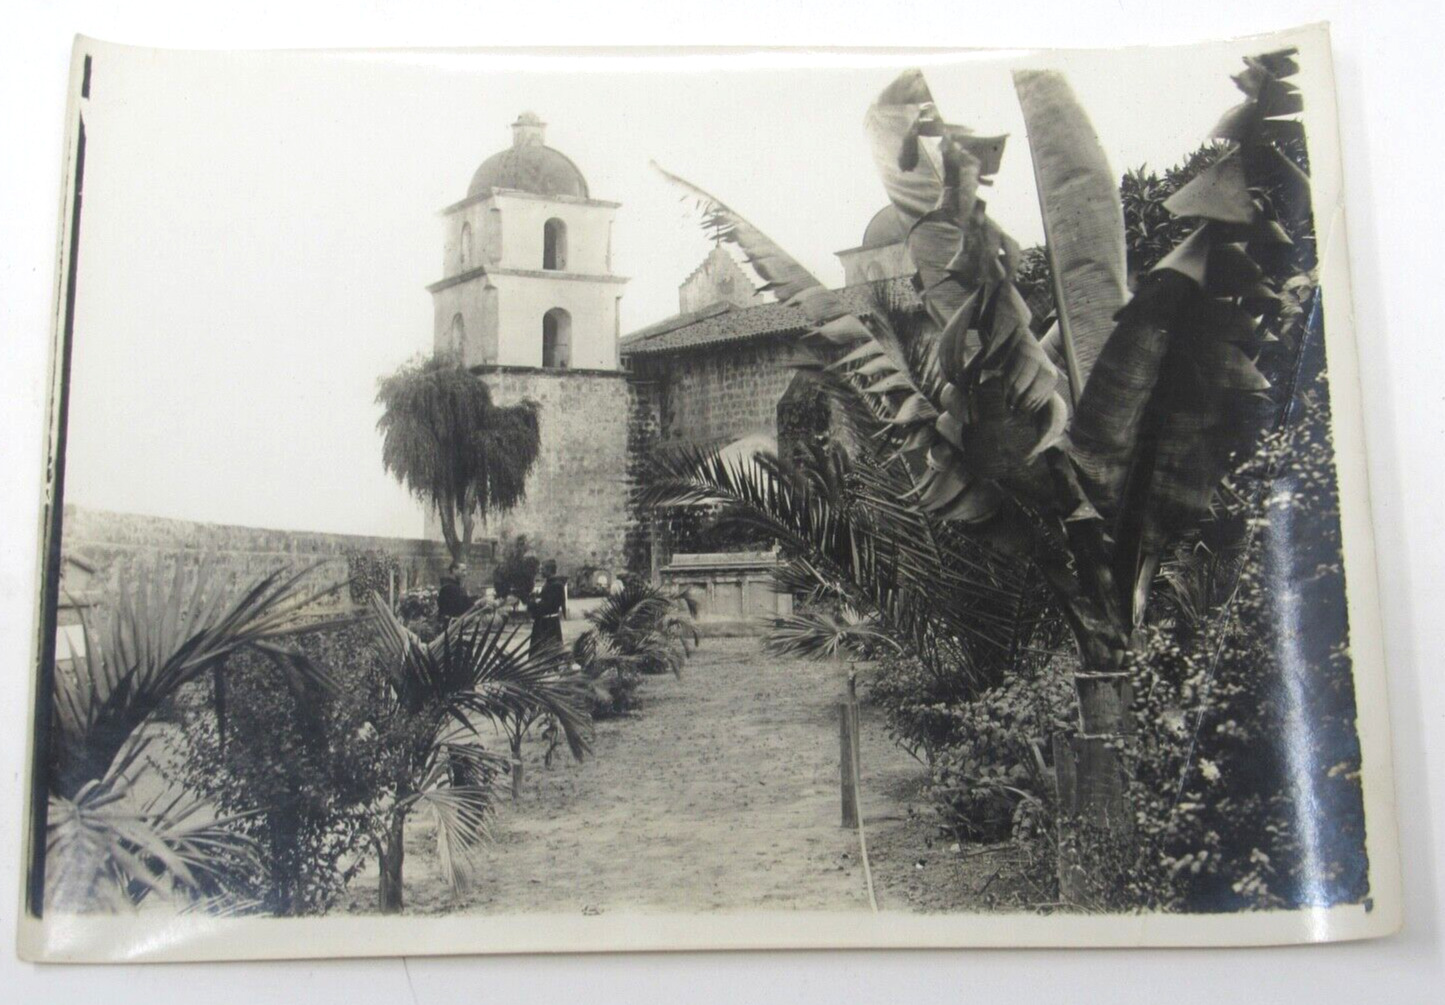 Santa Barbara Mission Two Franciscan Friars in the Garden c1906 Photo 5x7 RARE